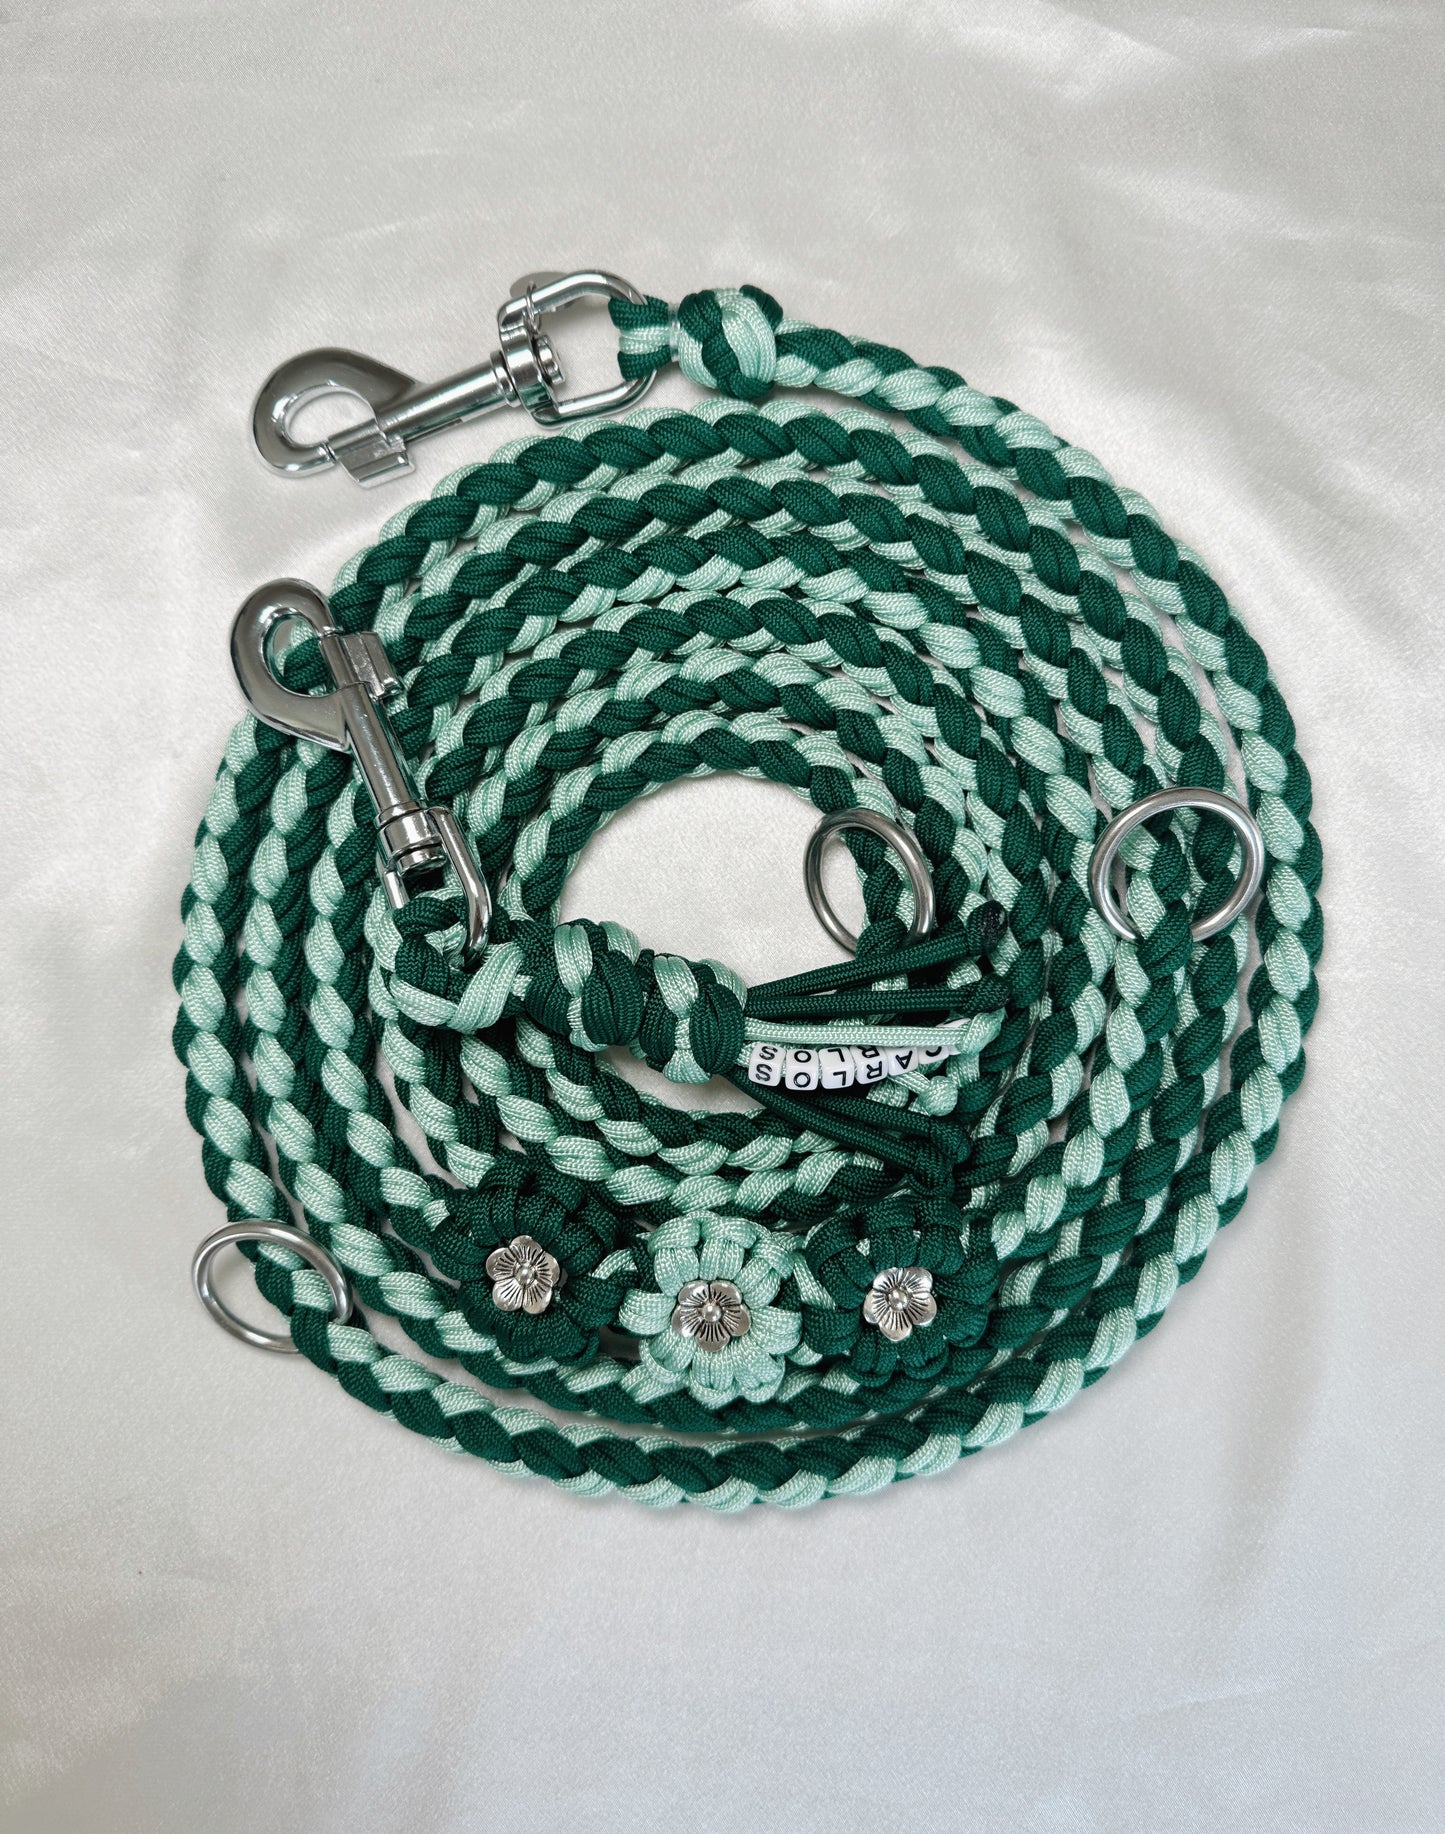 Round Flower Power dog leash in the color of your choice